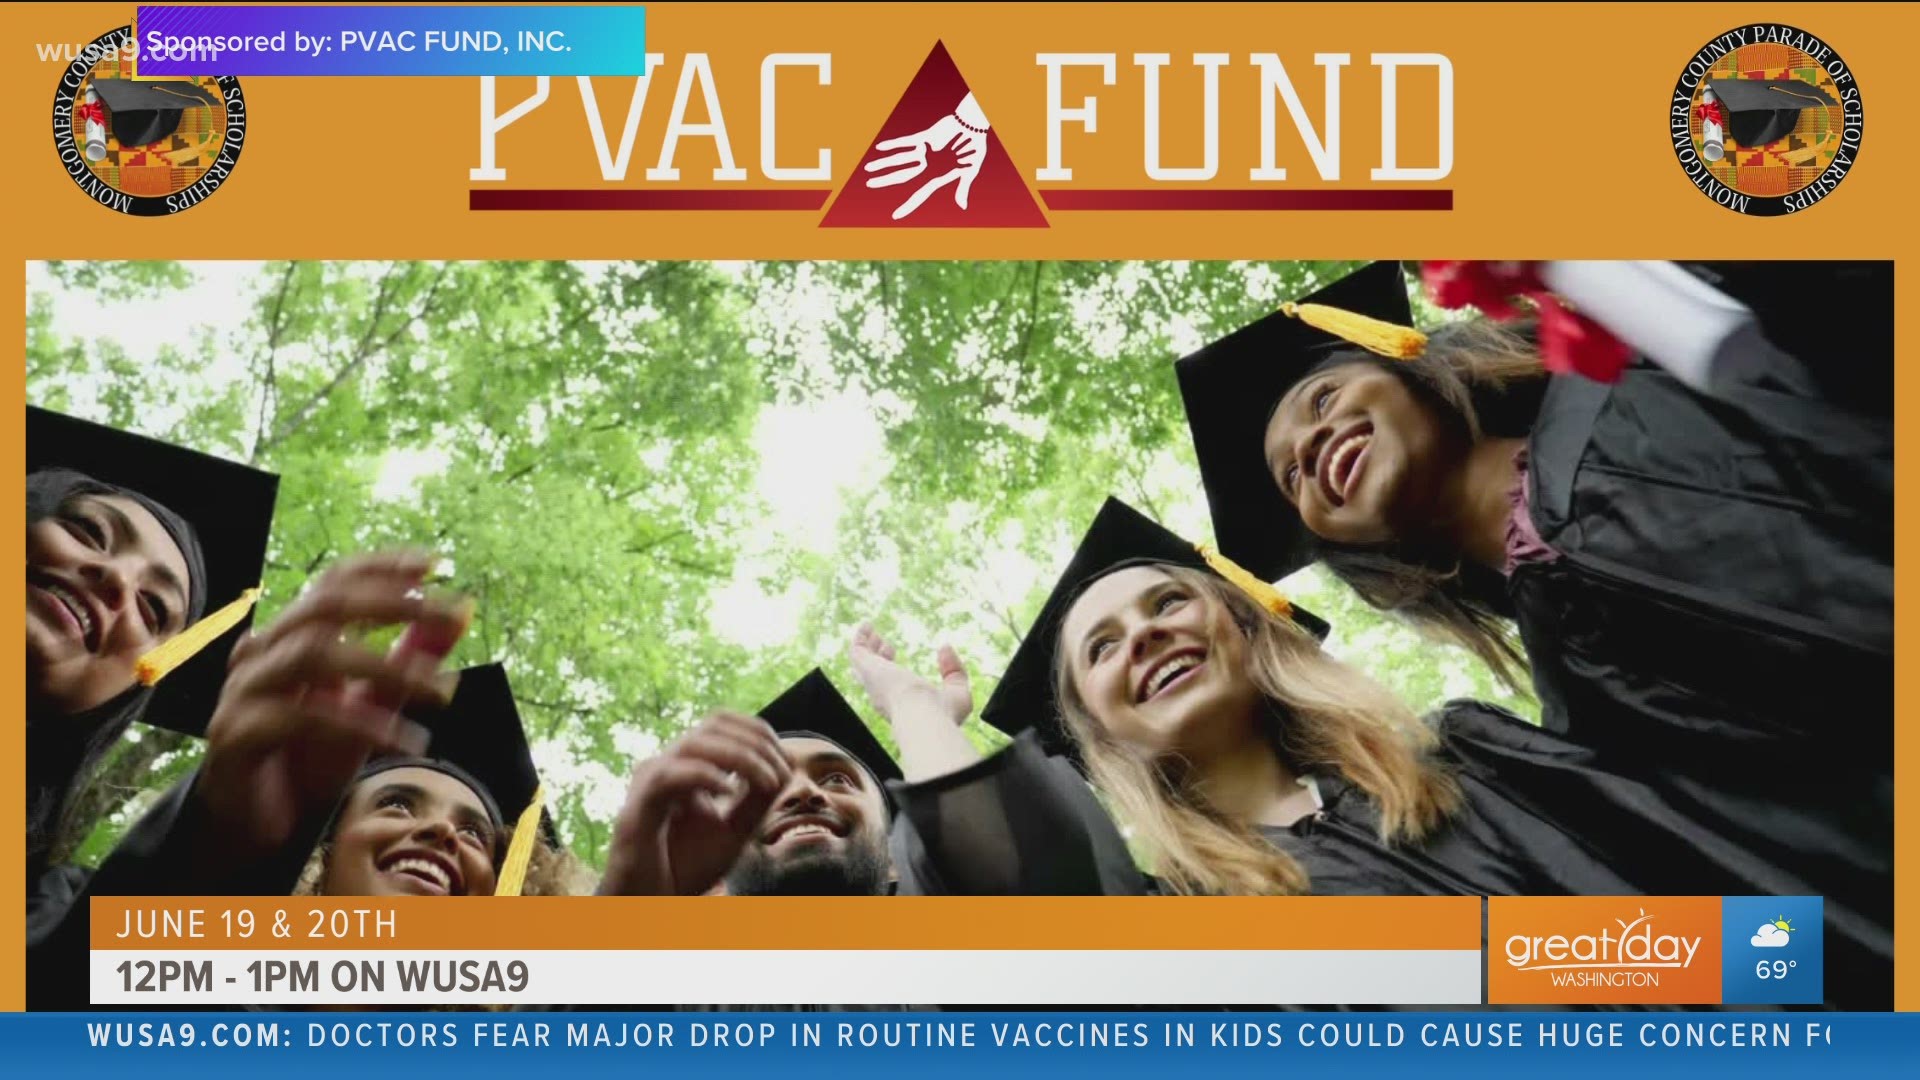 Sponsored by PVAC Fund. Watch the Montgomery County Parade of Scholarships. live on WUSA9 on June 19th & 20th, 12-1pm. Visit PVACFundINC.org for more information.